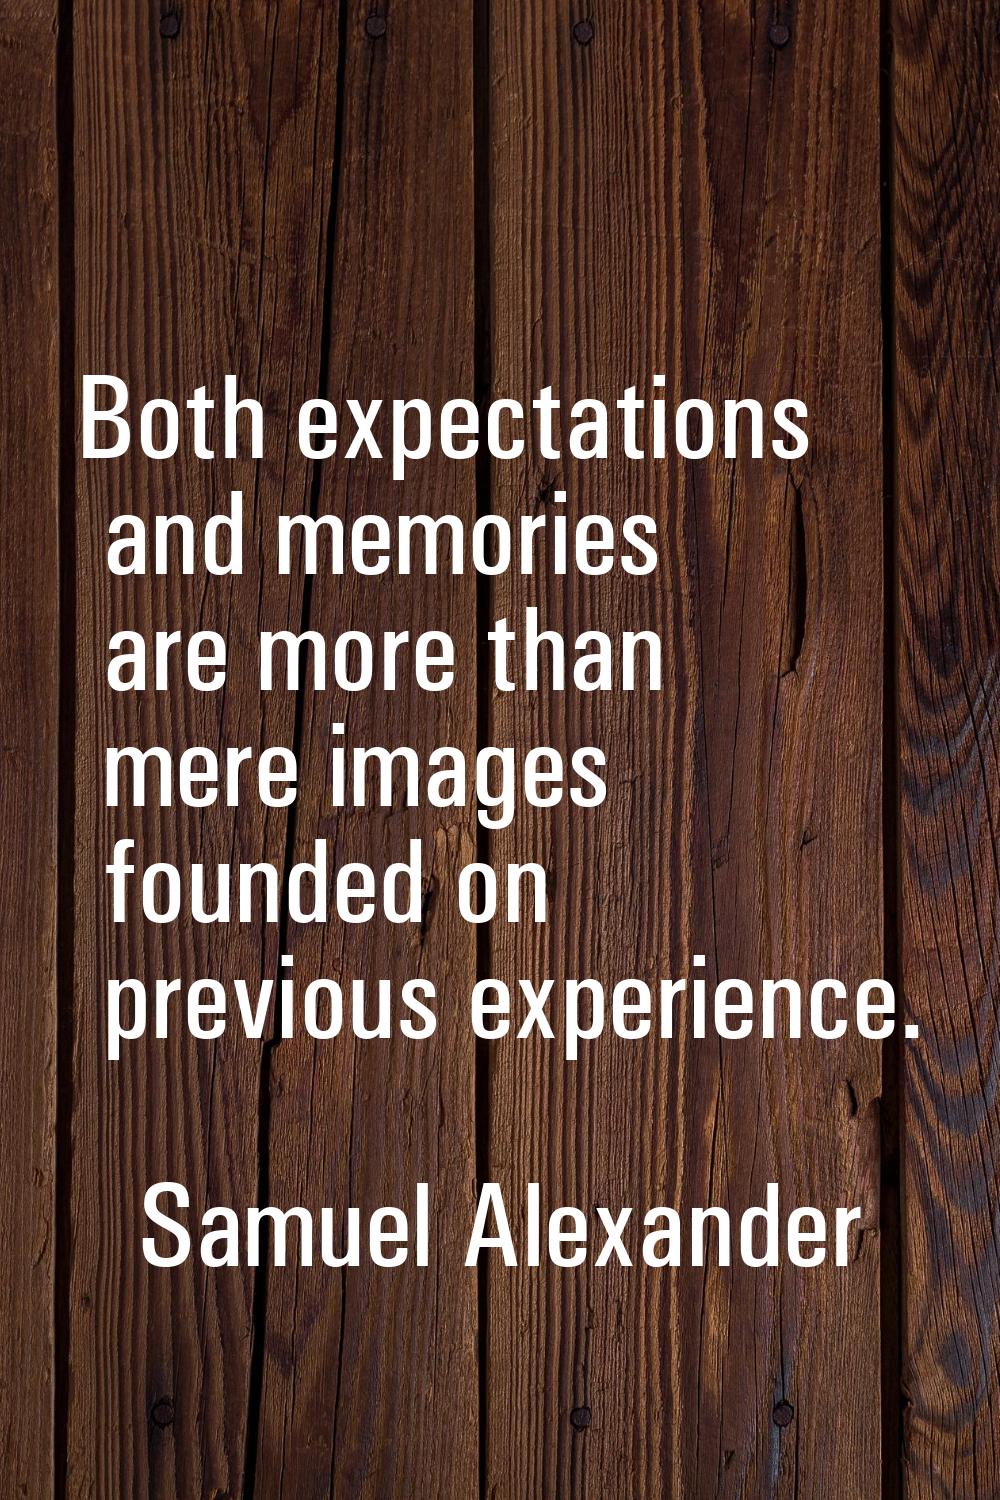 Both expectations and memories are more than mere images founded on previous experience.